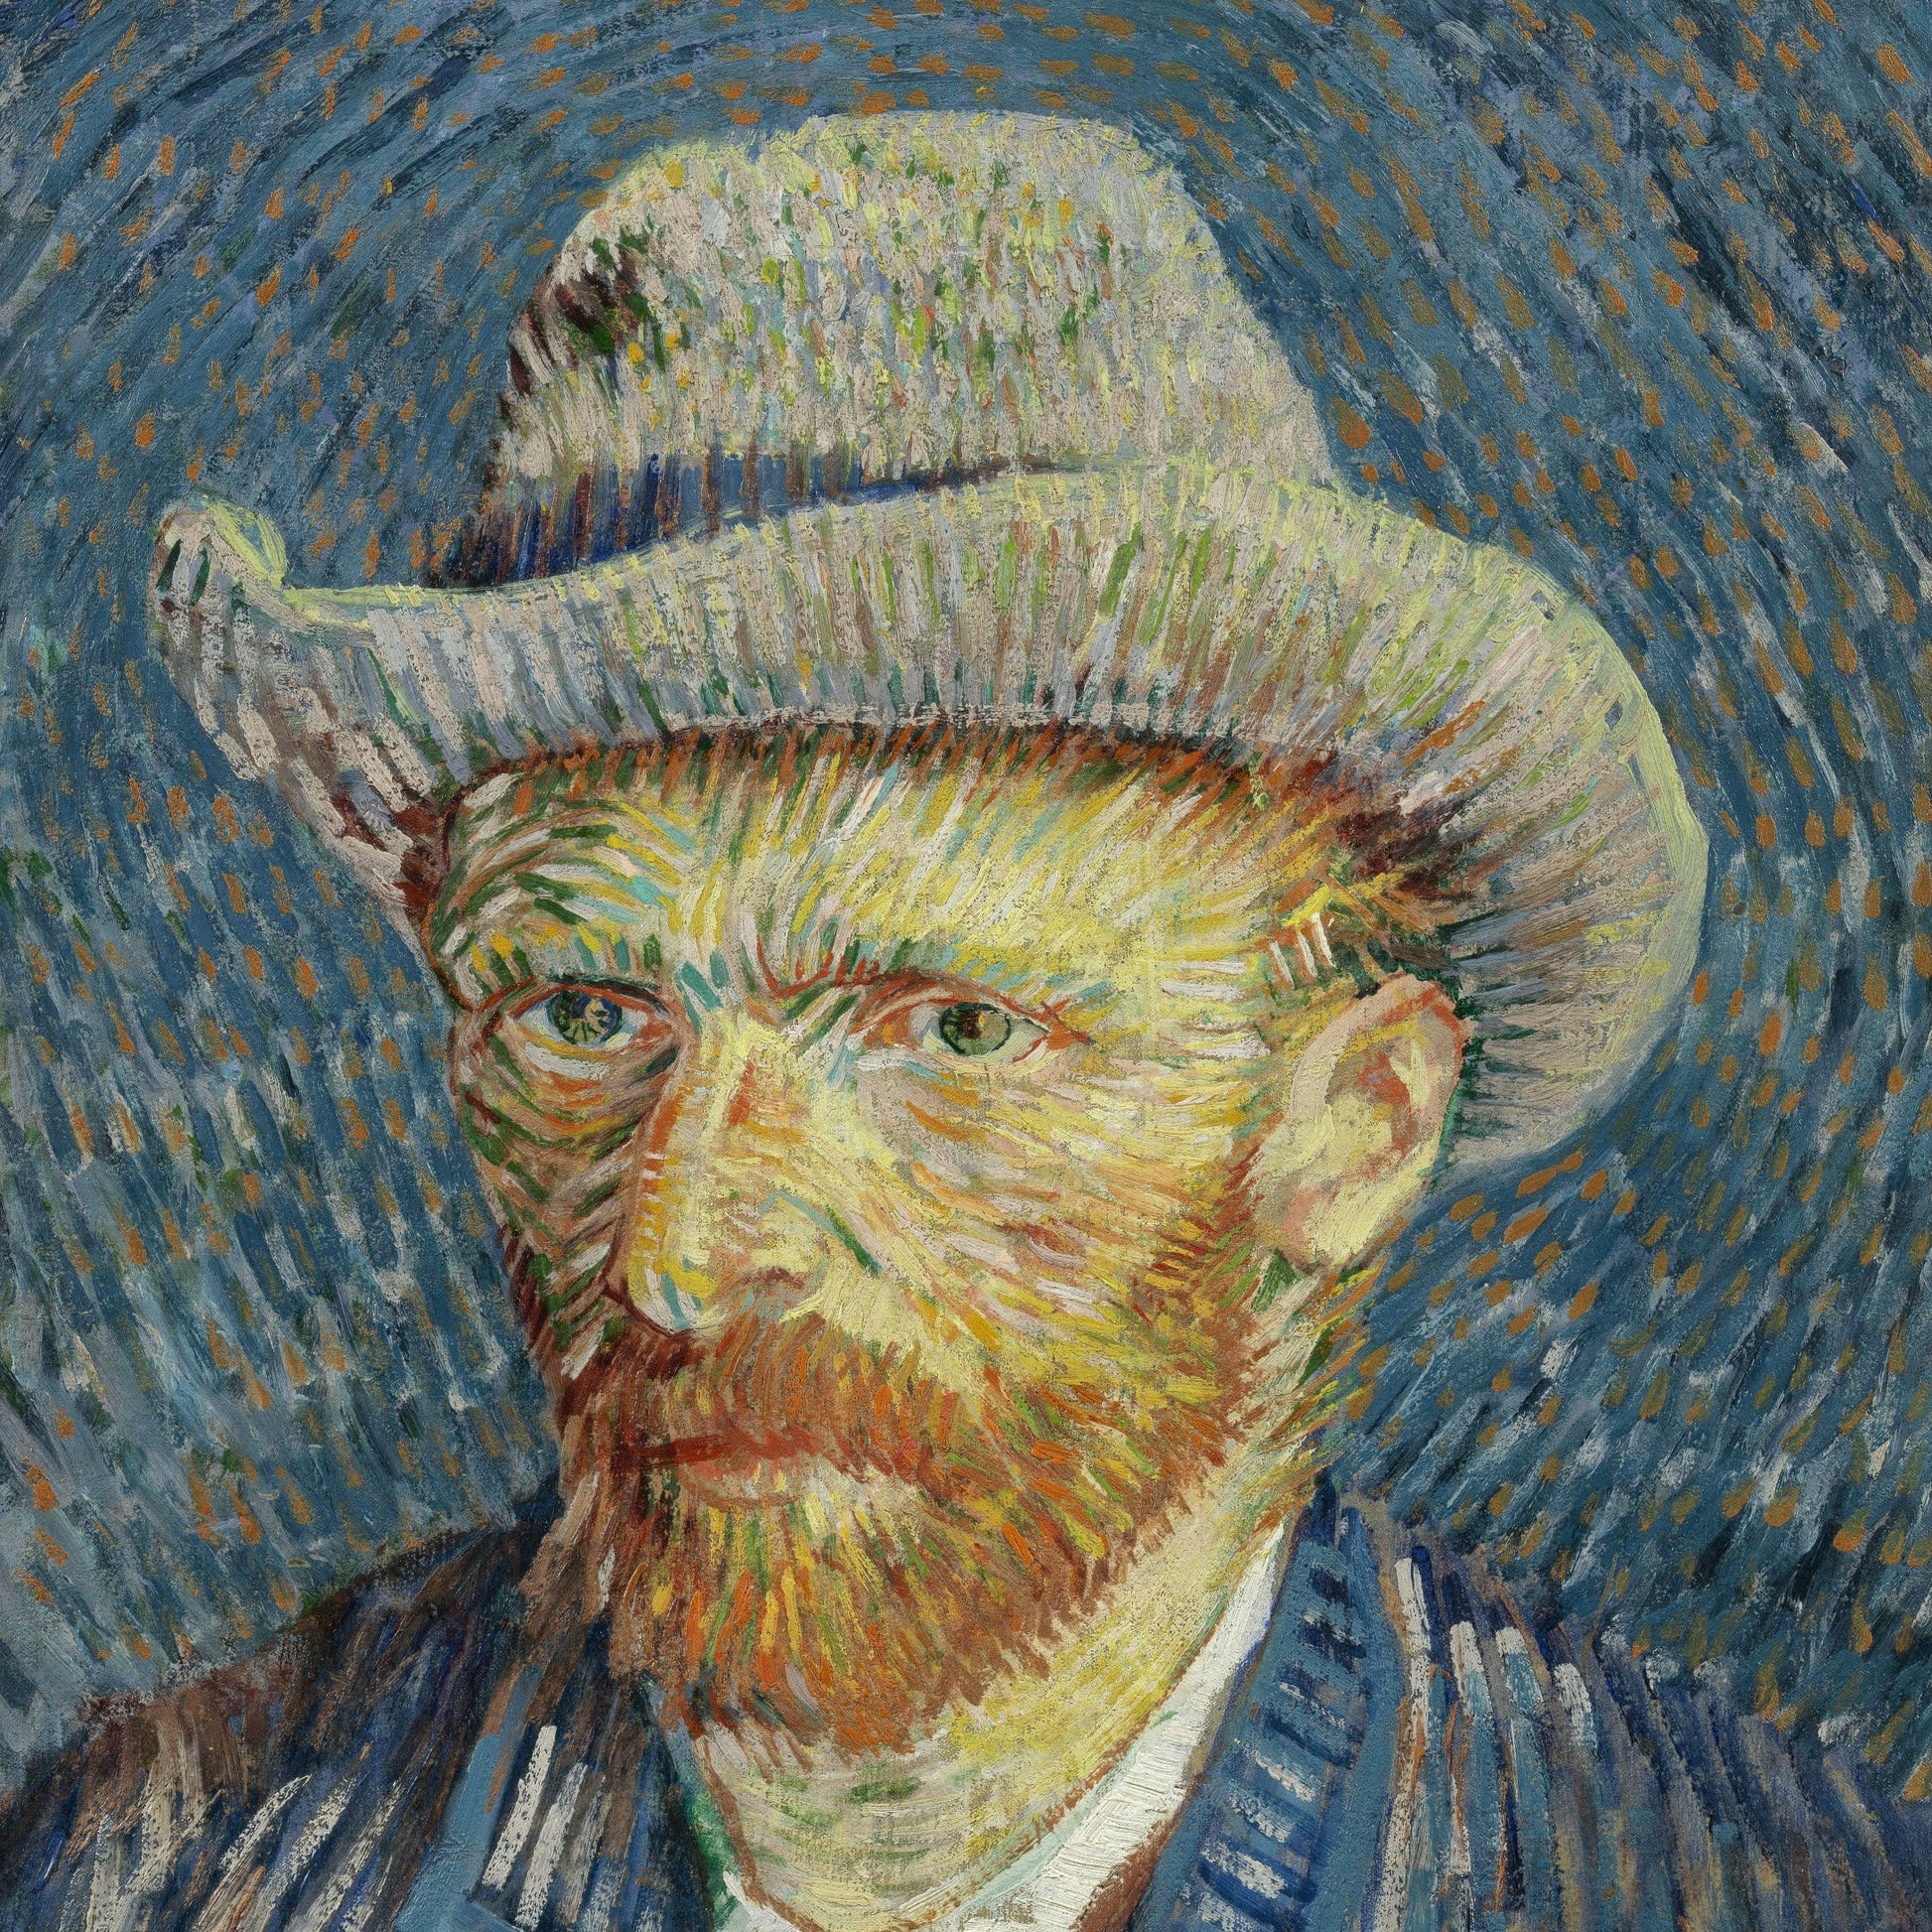 Self Portrait with Grey Felt Hat by Vincent Van Gogh, 3d Printed with texture and brush strokes looks like original oil-painting, code:070